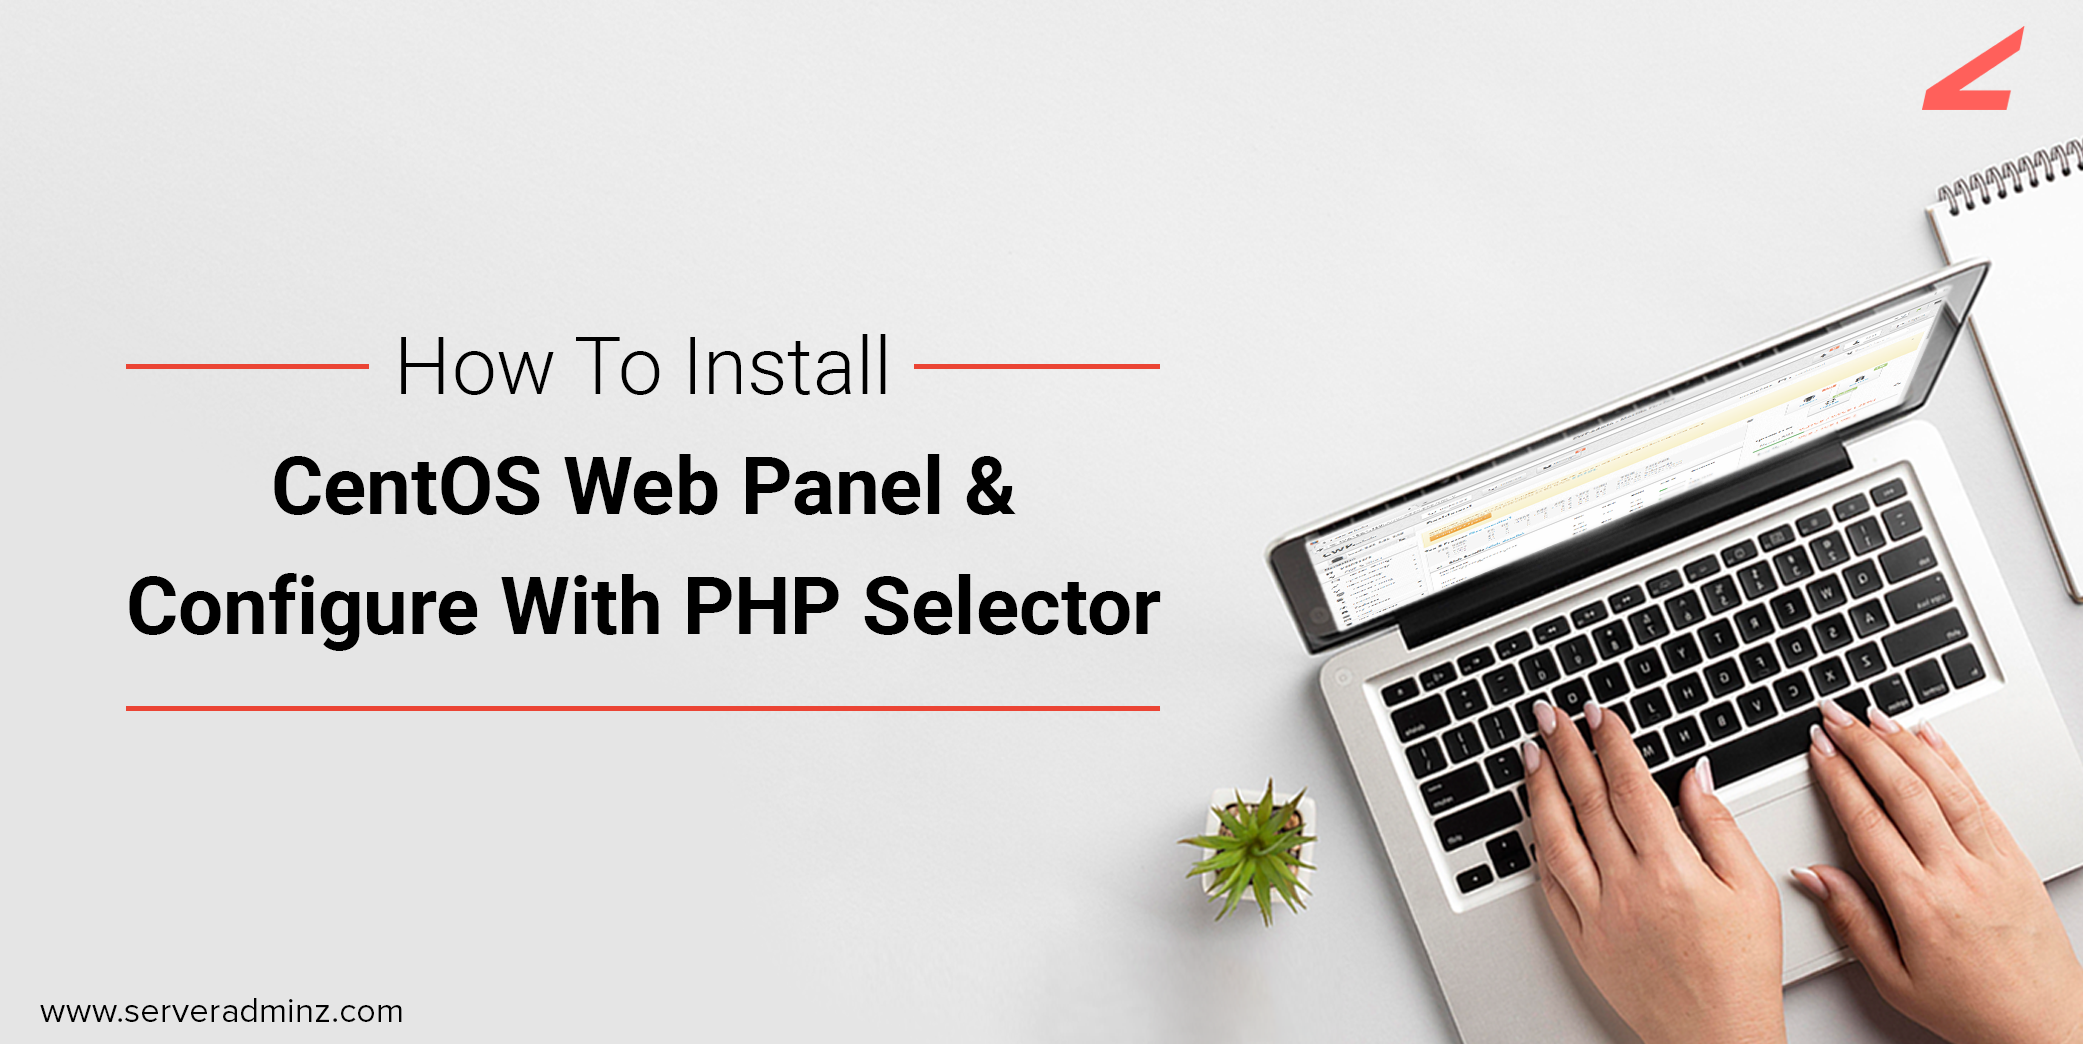 How To Install CentOS Web Panel & Configure With PHP Selector